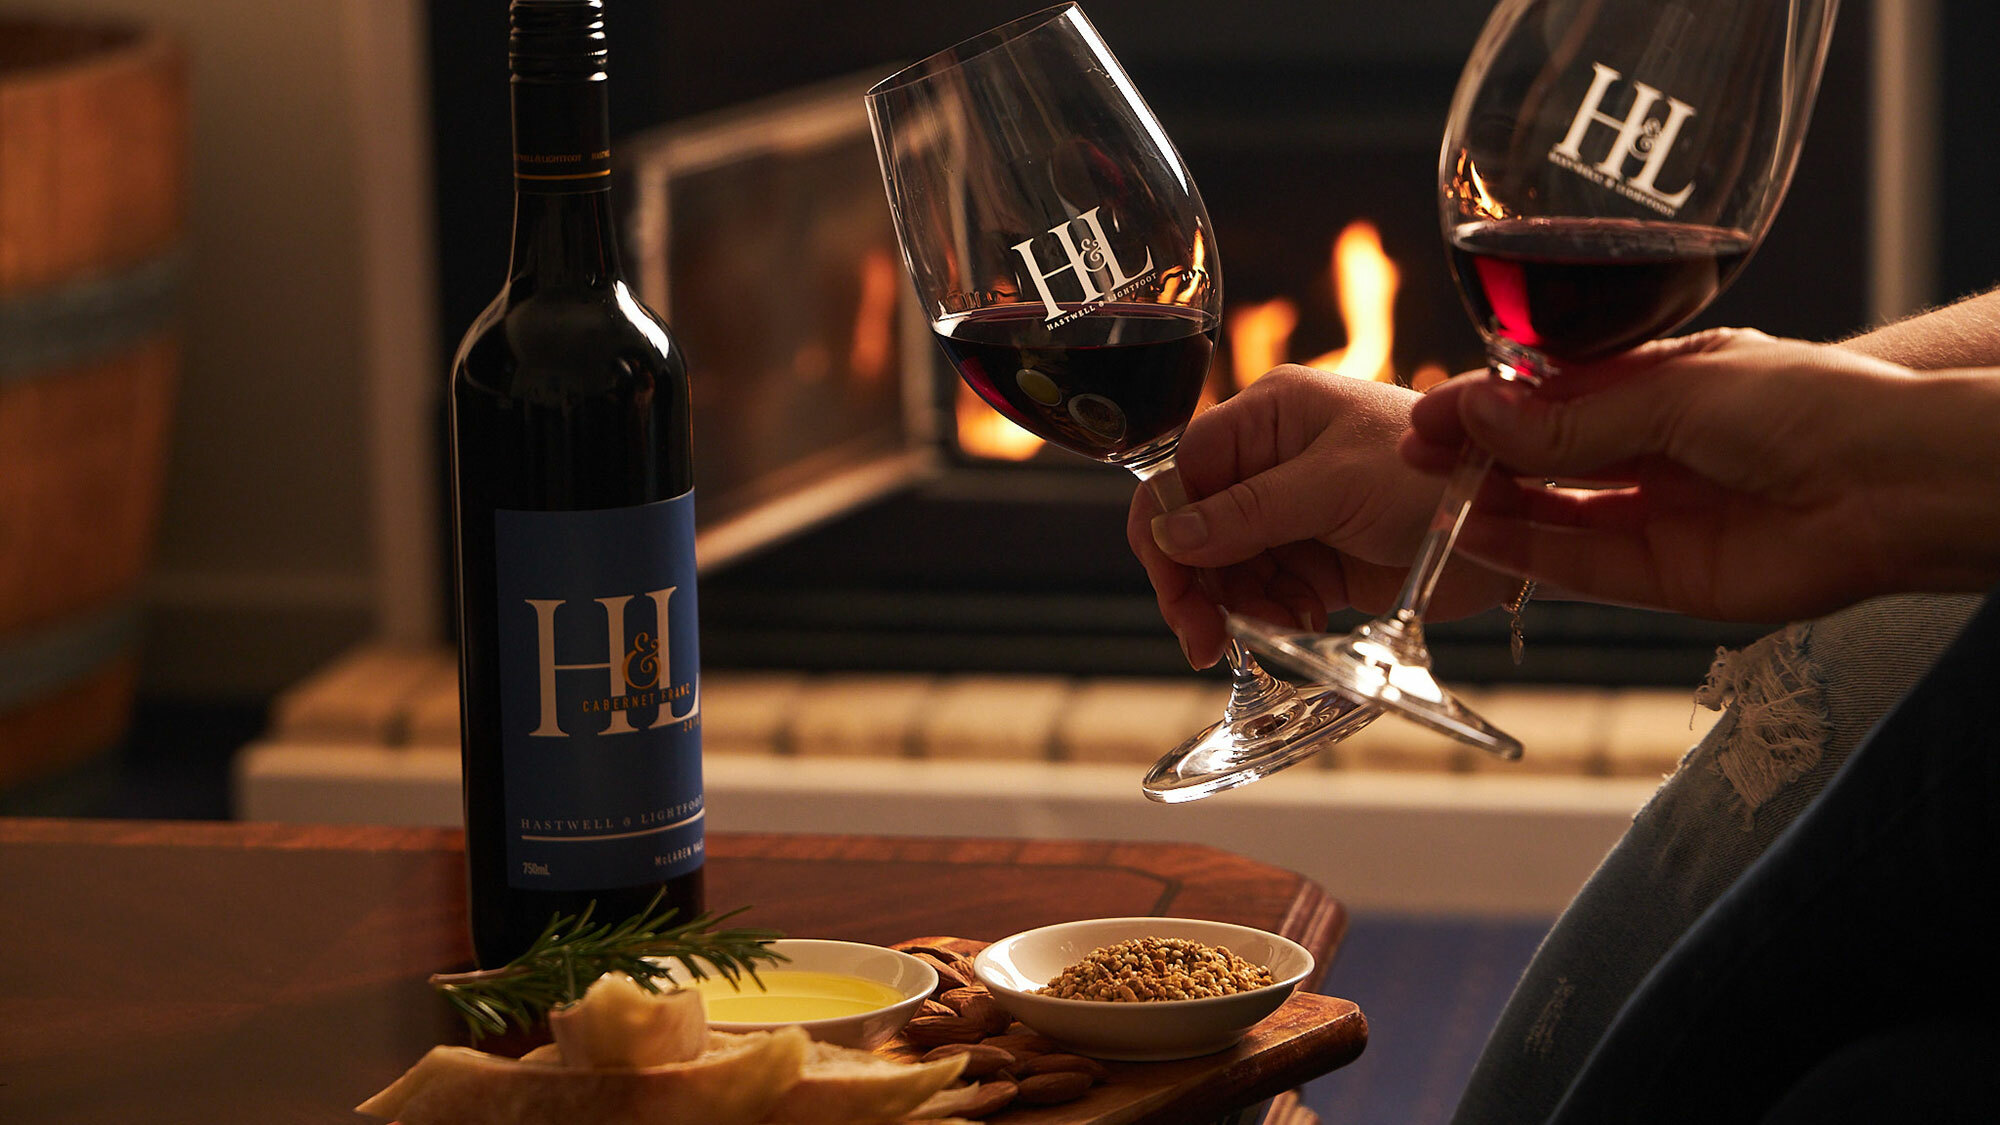 Hastwell & Lightfoot Wine Tasting & Grazing Platter by the Fire